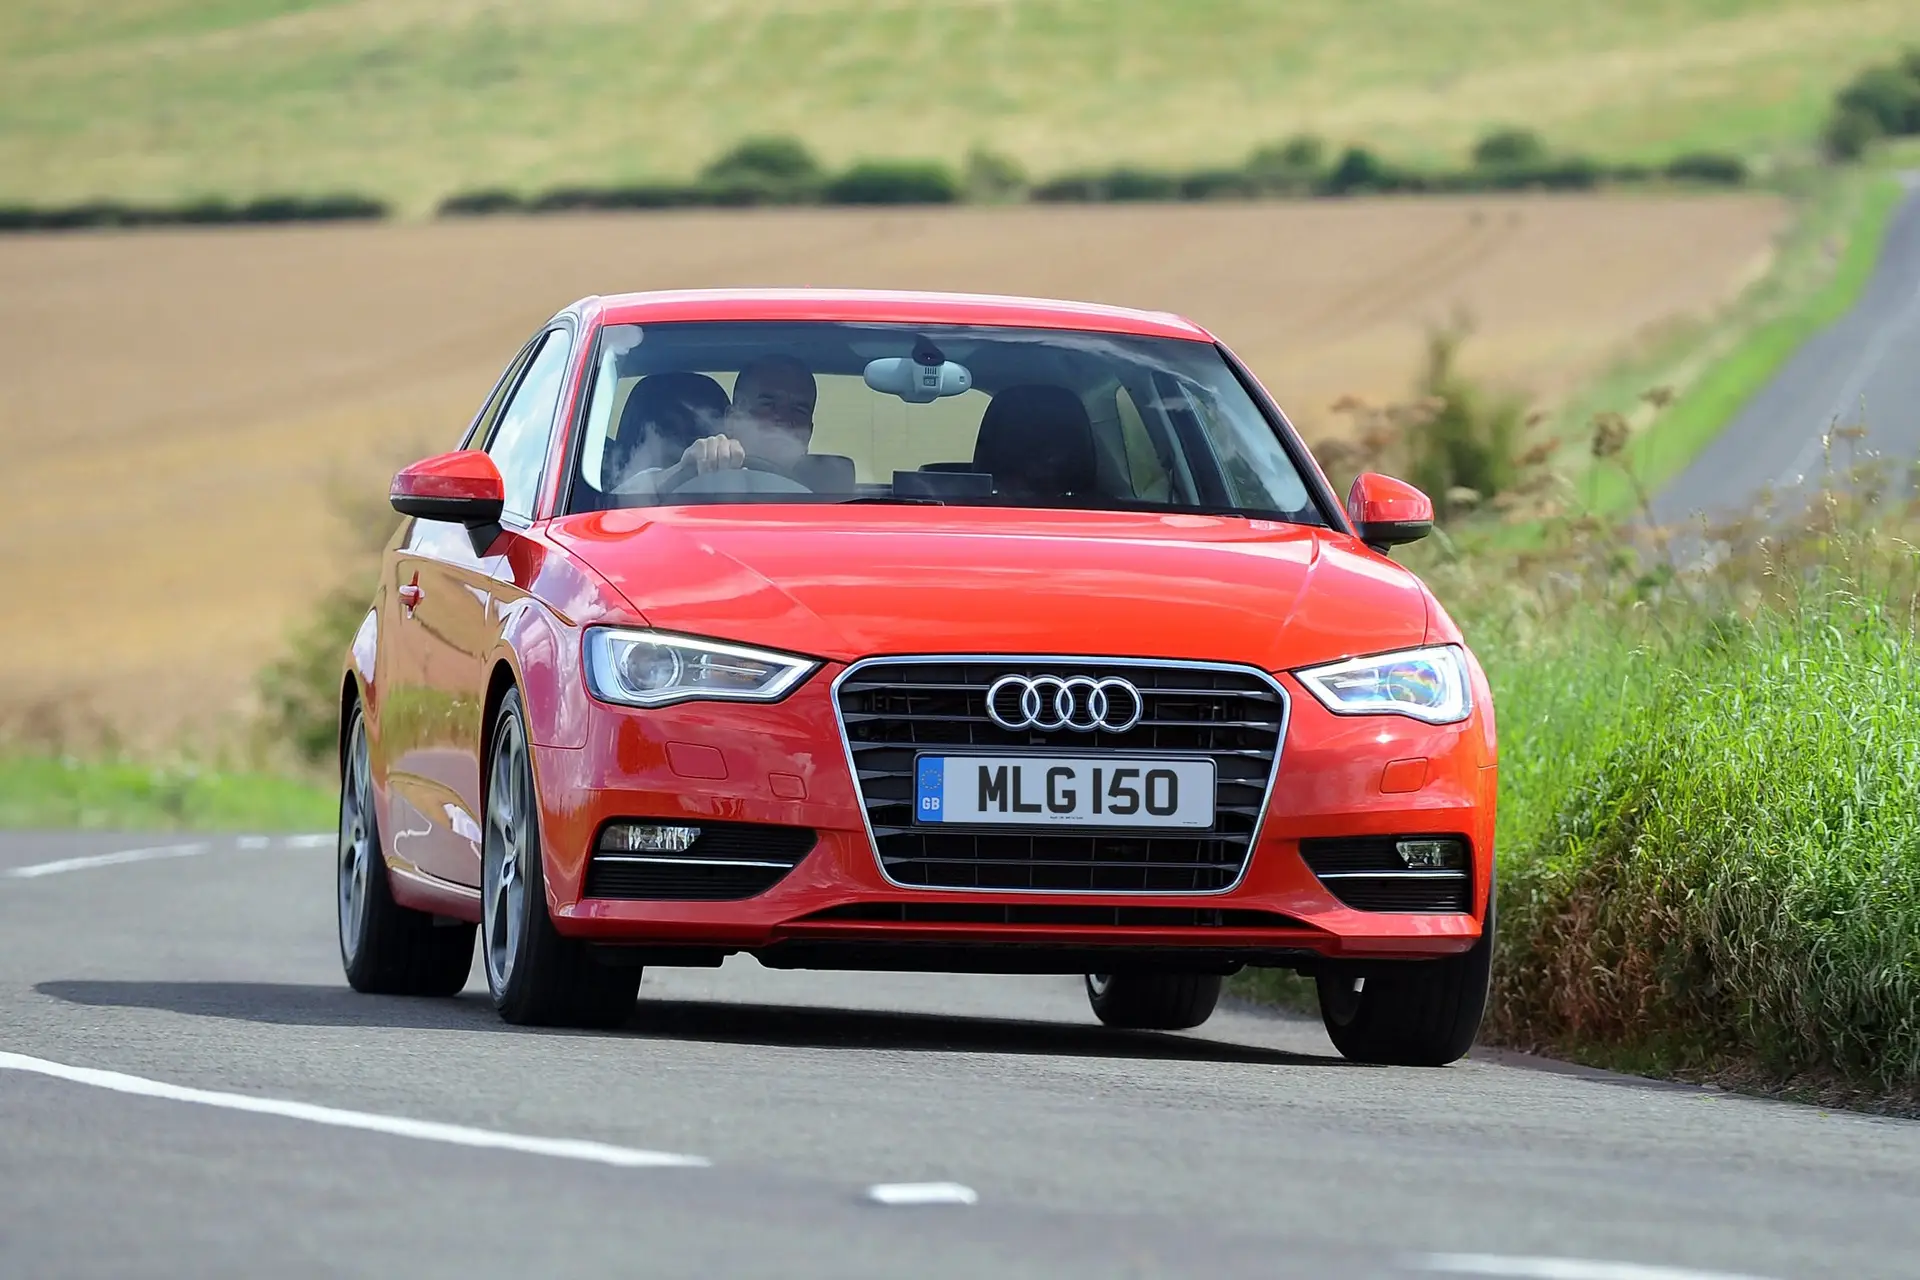 Audi A3 (2012-2020) Review: exterior front three quarter photo of the Audi A3 on the road